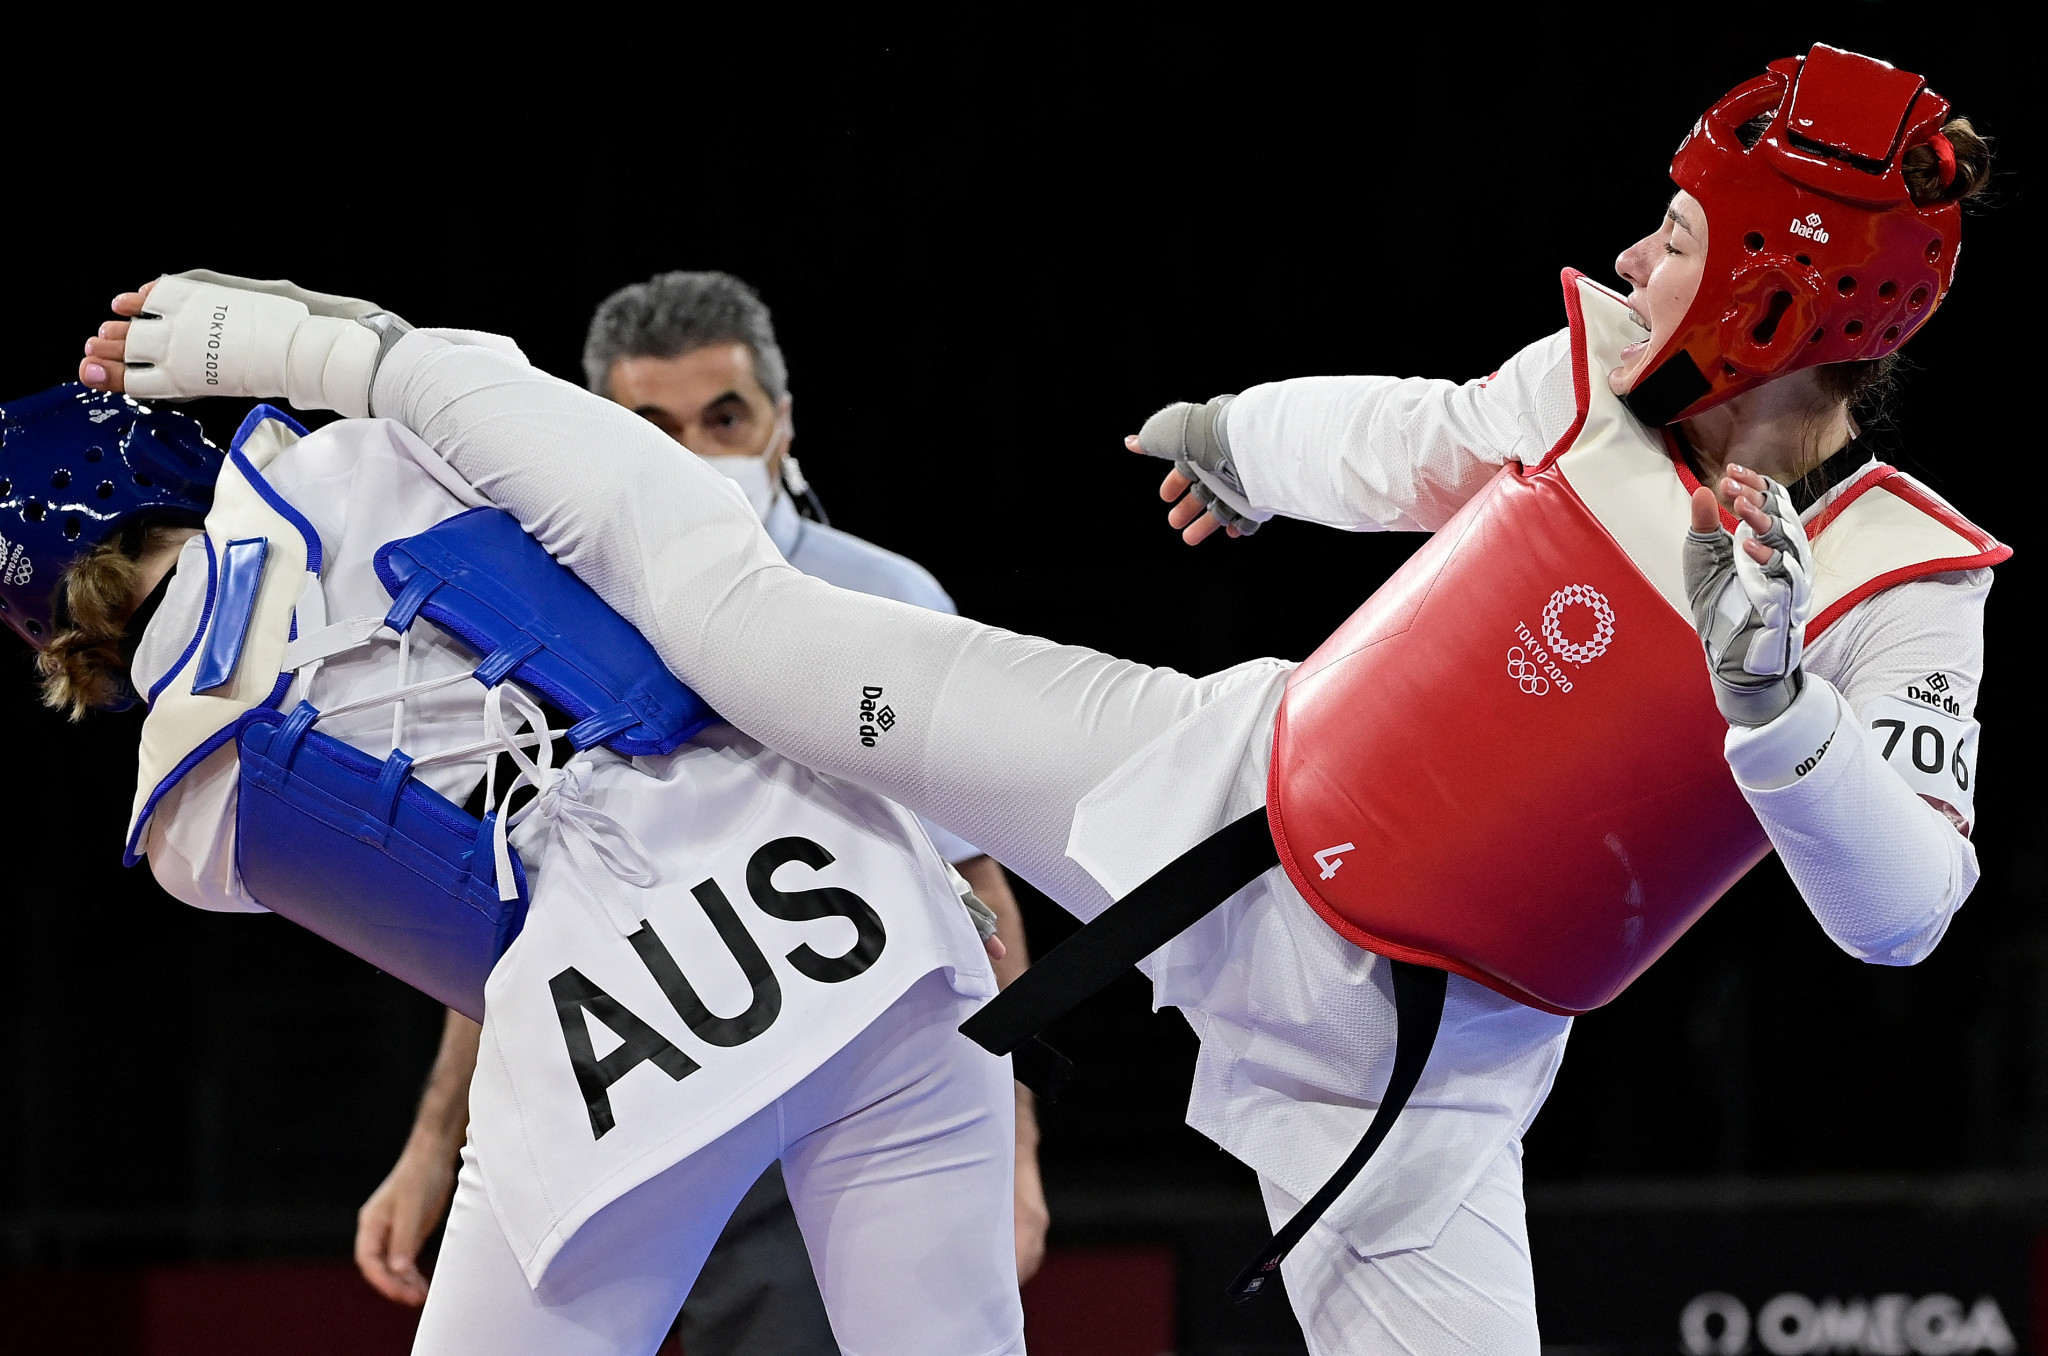 Australian Taekwondo is seeking experienced coaches to join its National Performance Pathway Program and support talented young athletes transition to international success ©Getty Images